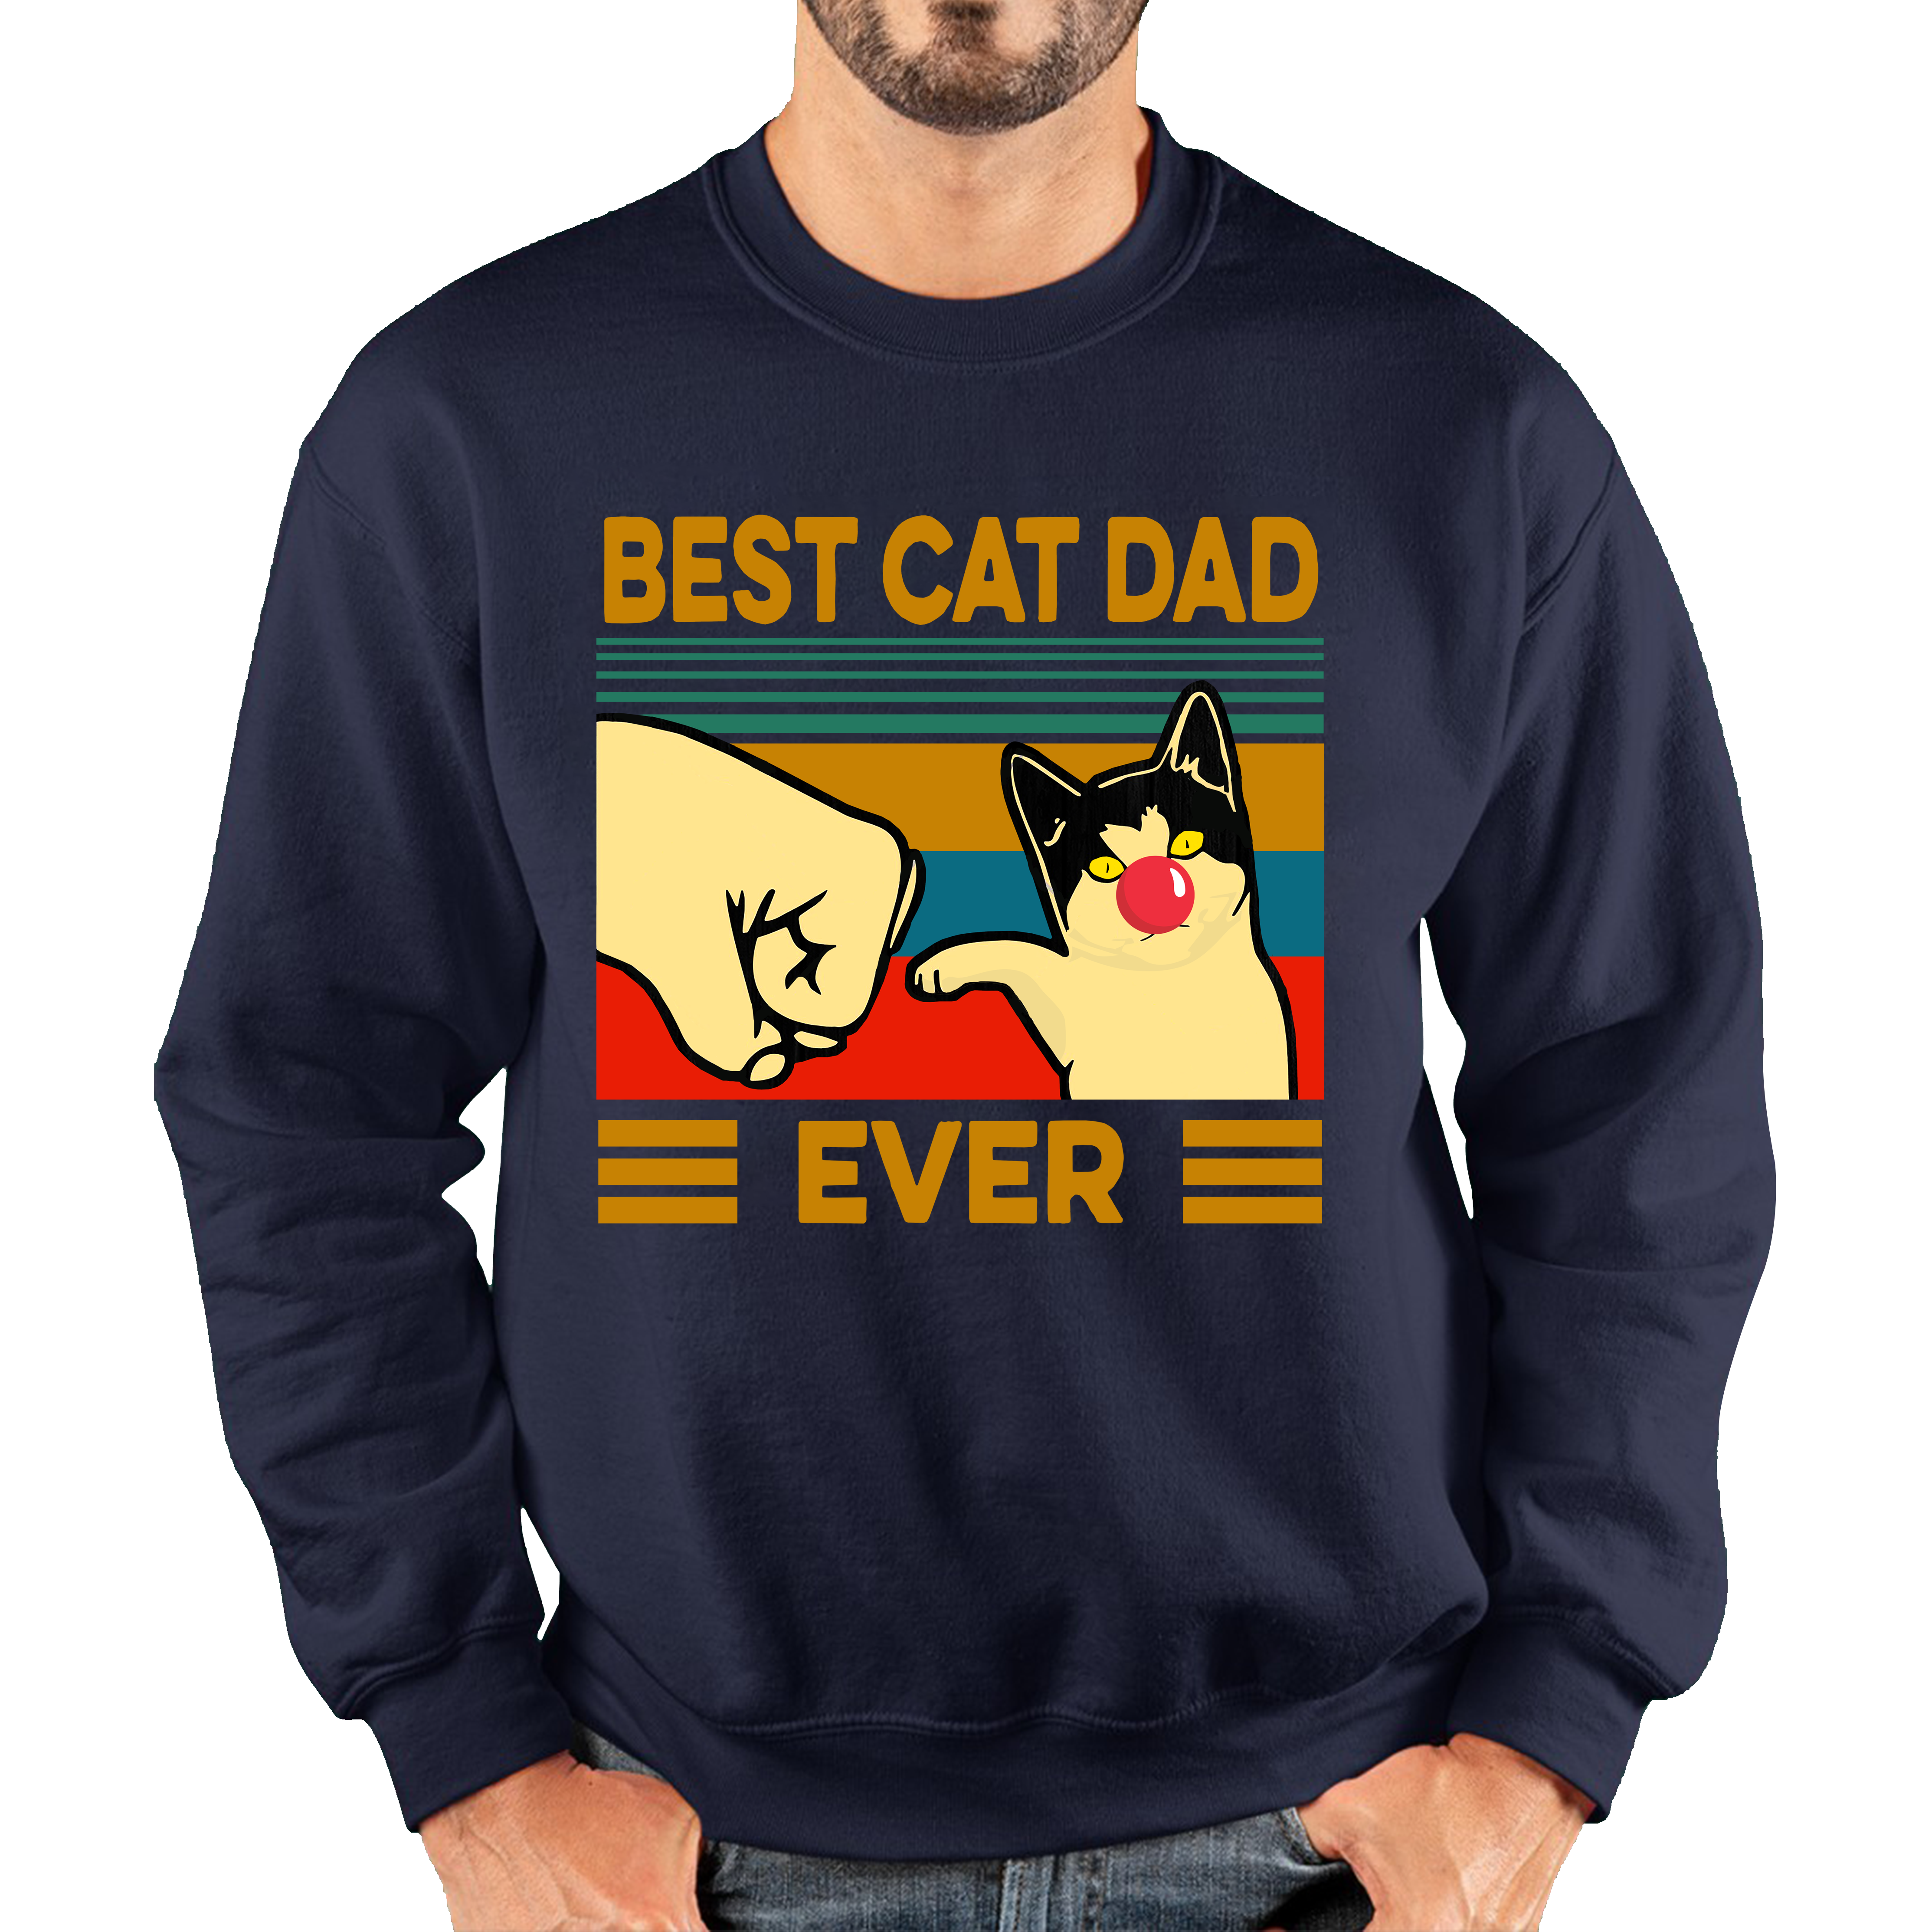 Best Cat Dad Ever Red Nose Day Adult Sweatshirt. 50% Goes To Charity